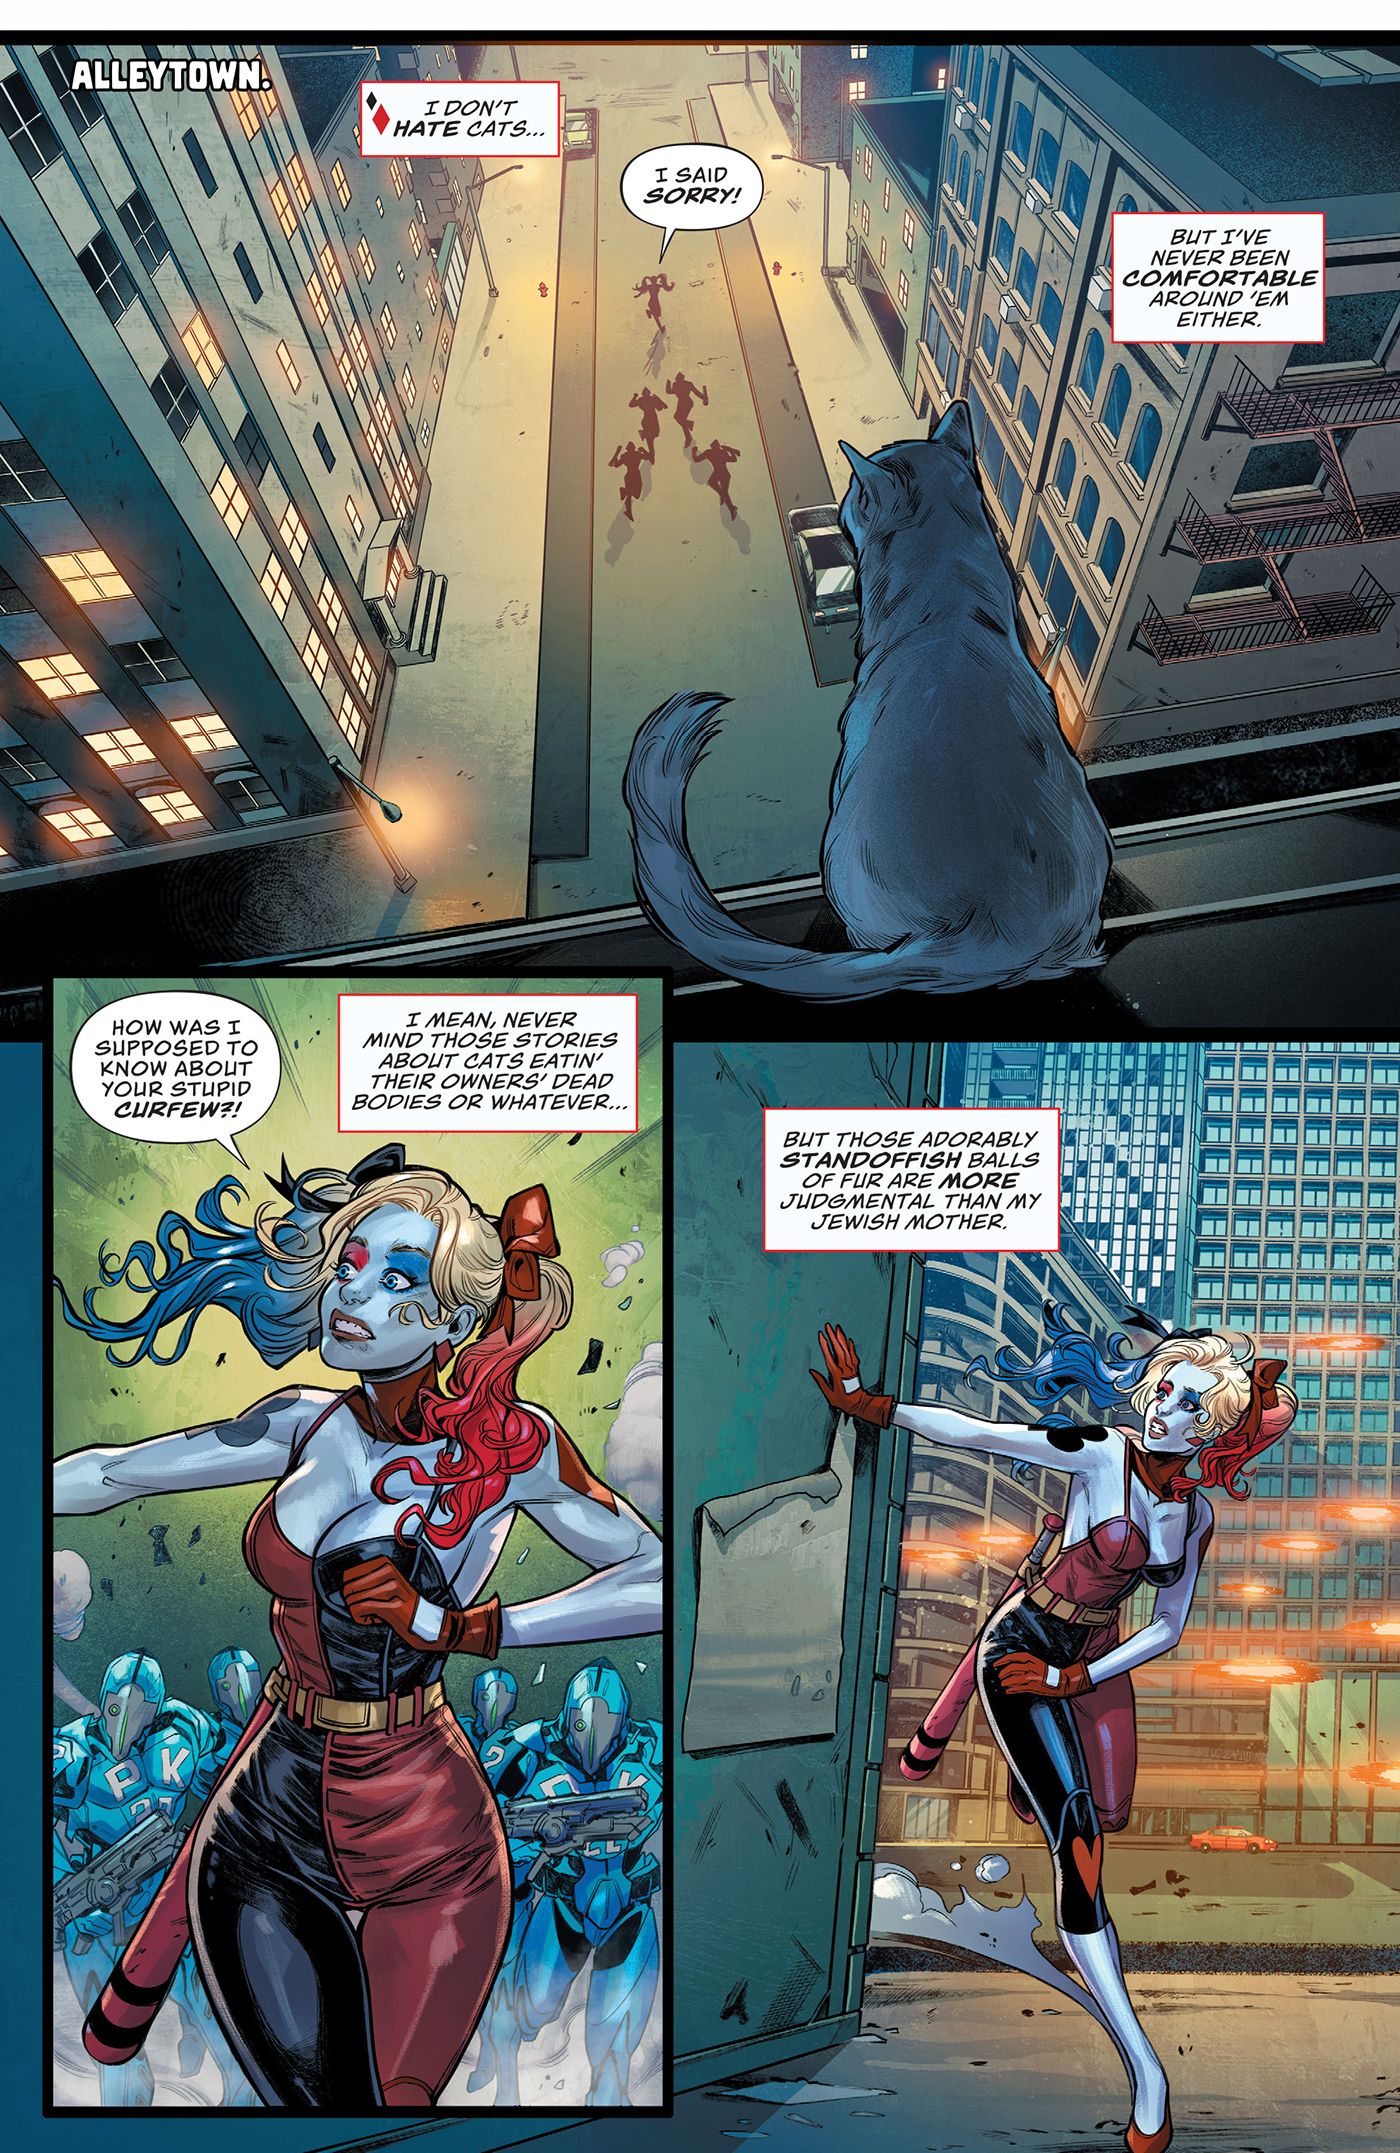 Harley Quinn runs from peacekeepers while discussing cats.